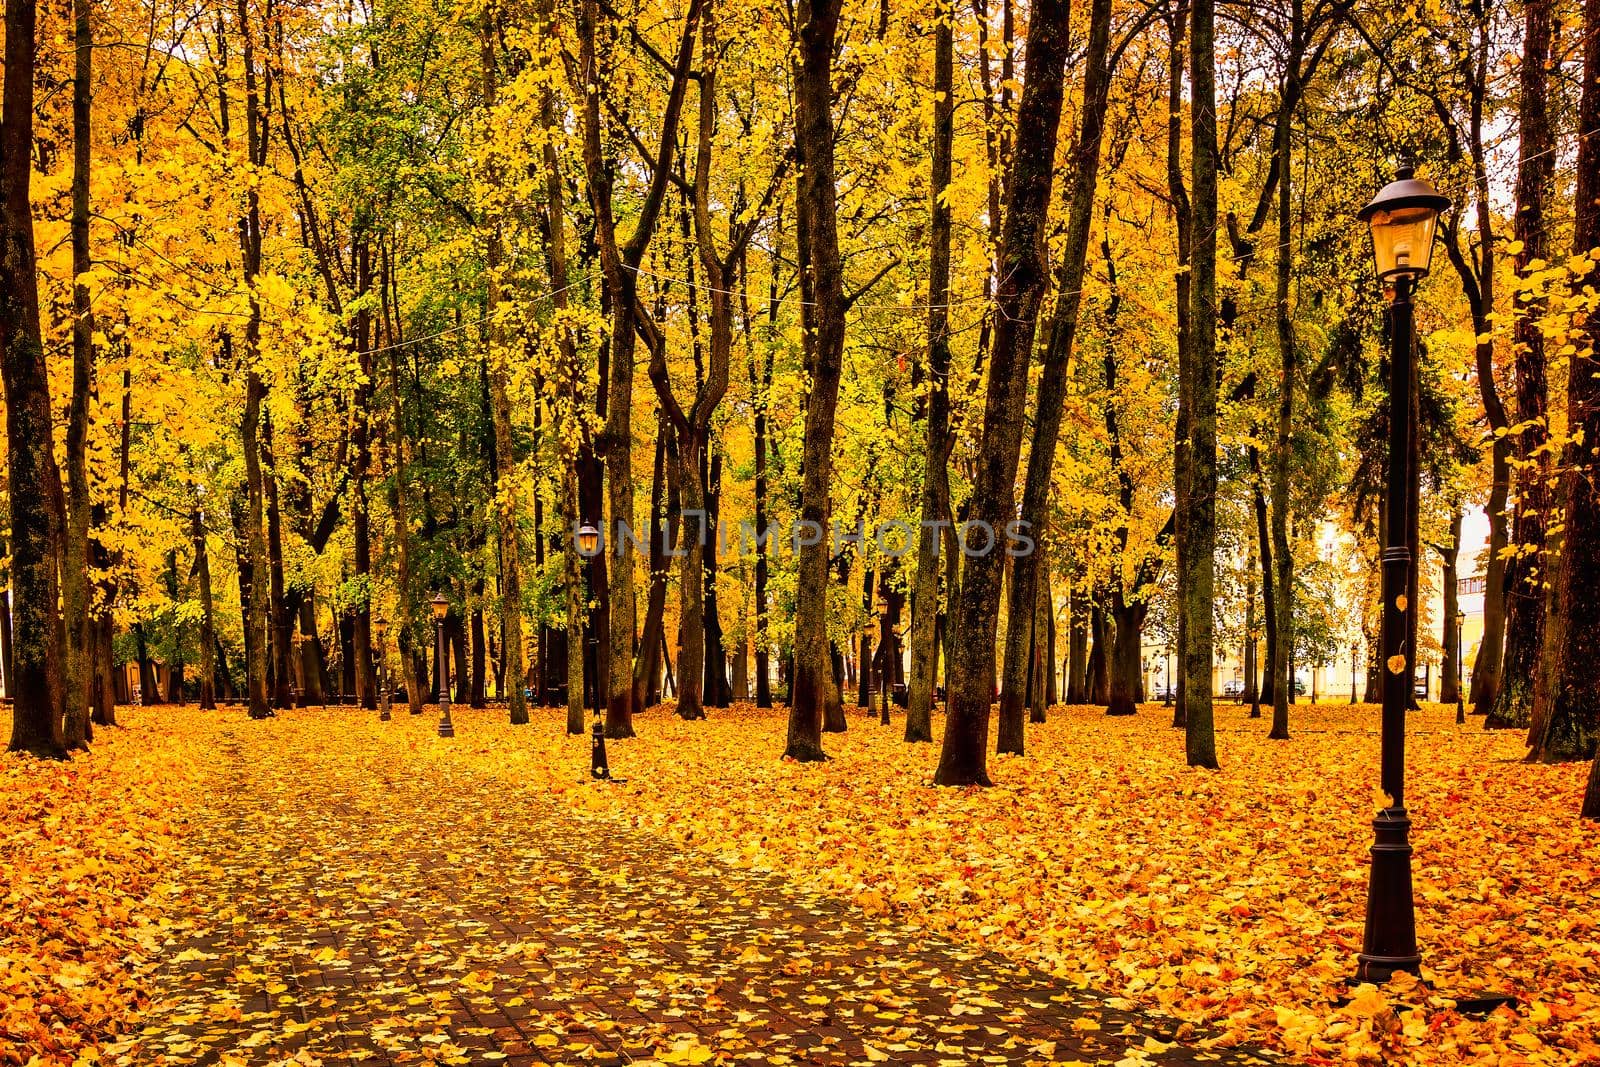 Golden autumn in a city park with trees and fallen leaves on a cloudy day. by Eugene_Yemelyanov